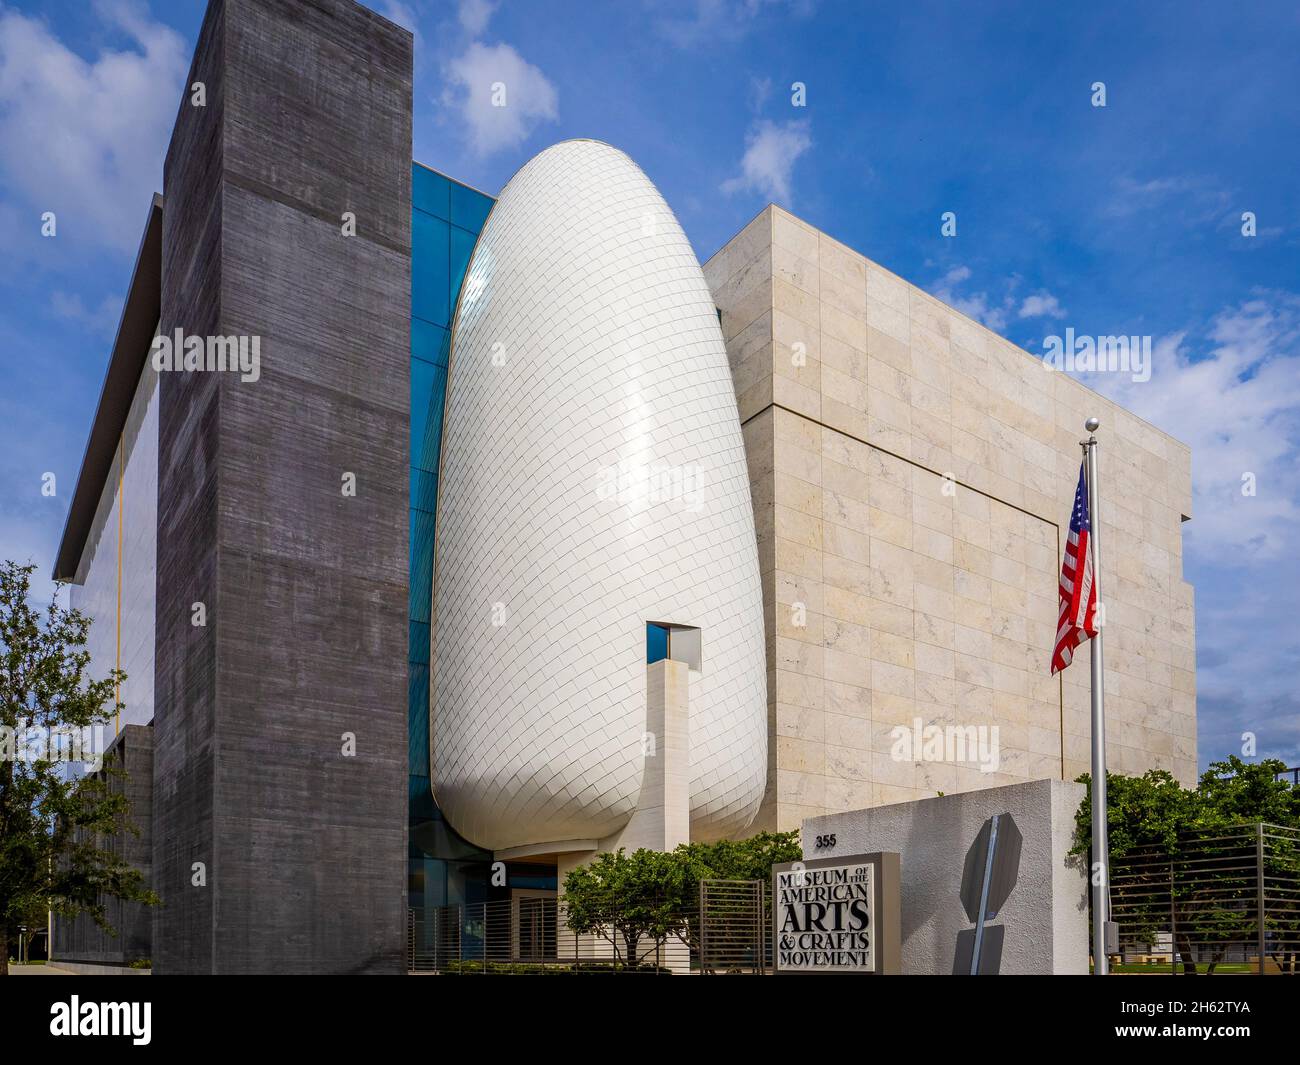 Exterior of The Museum of American Arts & Crafts Movement or MAACM building in St Petersburg Florida USA Stock Photo